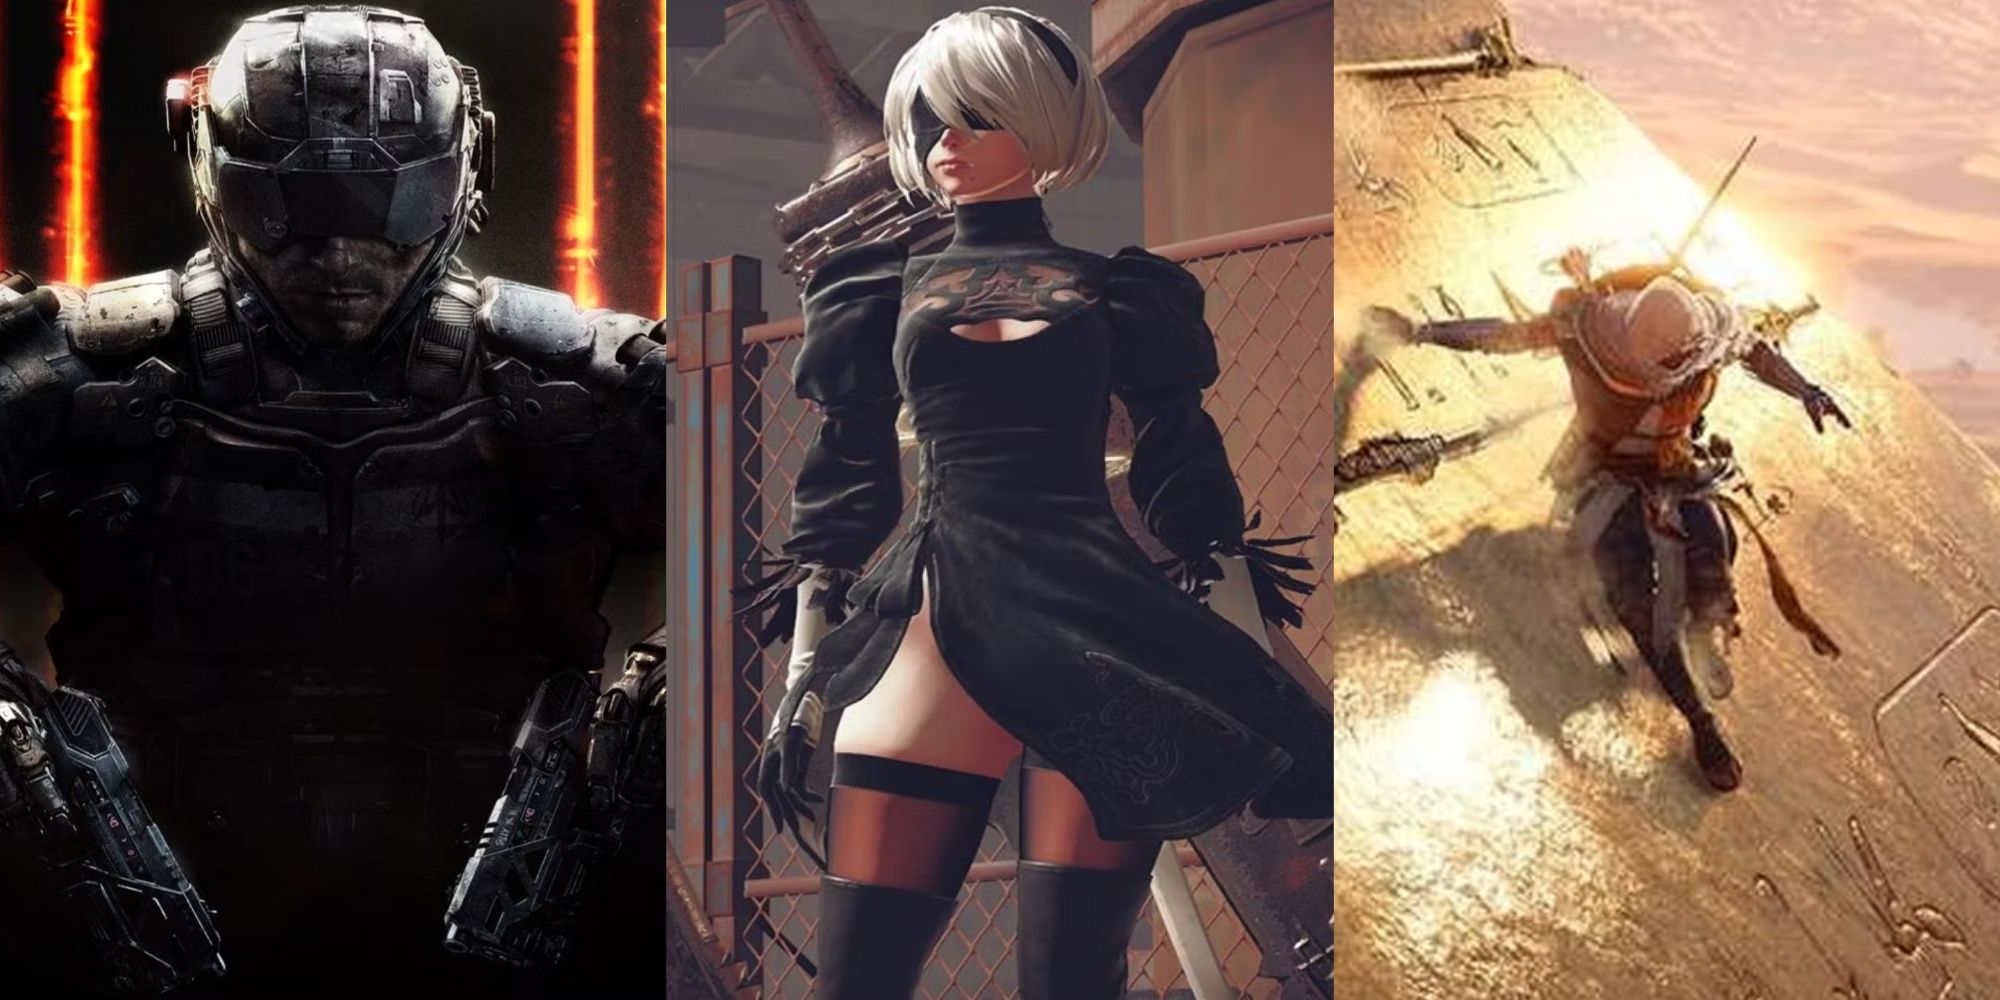 Box art to Black Ops 3, 2B from Nier Automata, and a pyramid from Assassin's Creed Origins